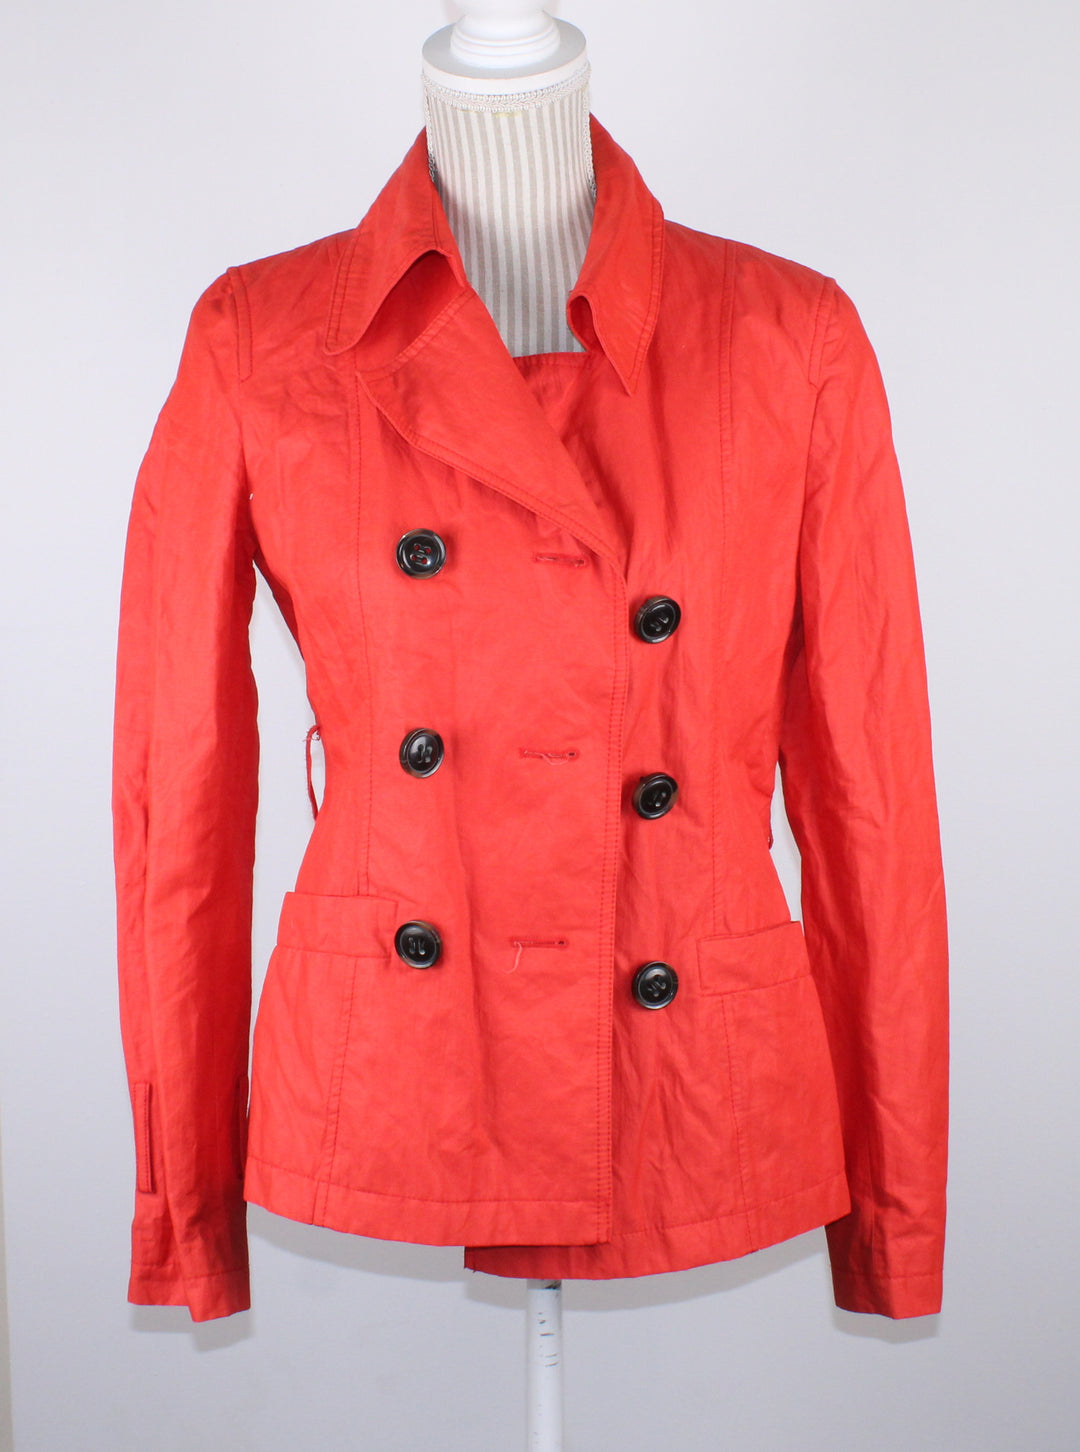 BEDO FEMME CORAL SPRING/FALL JACKET LADIES SMALL VGUC